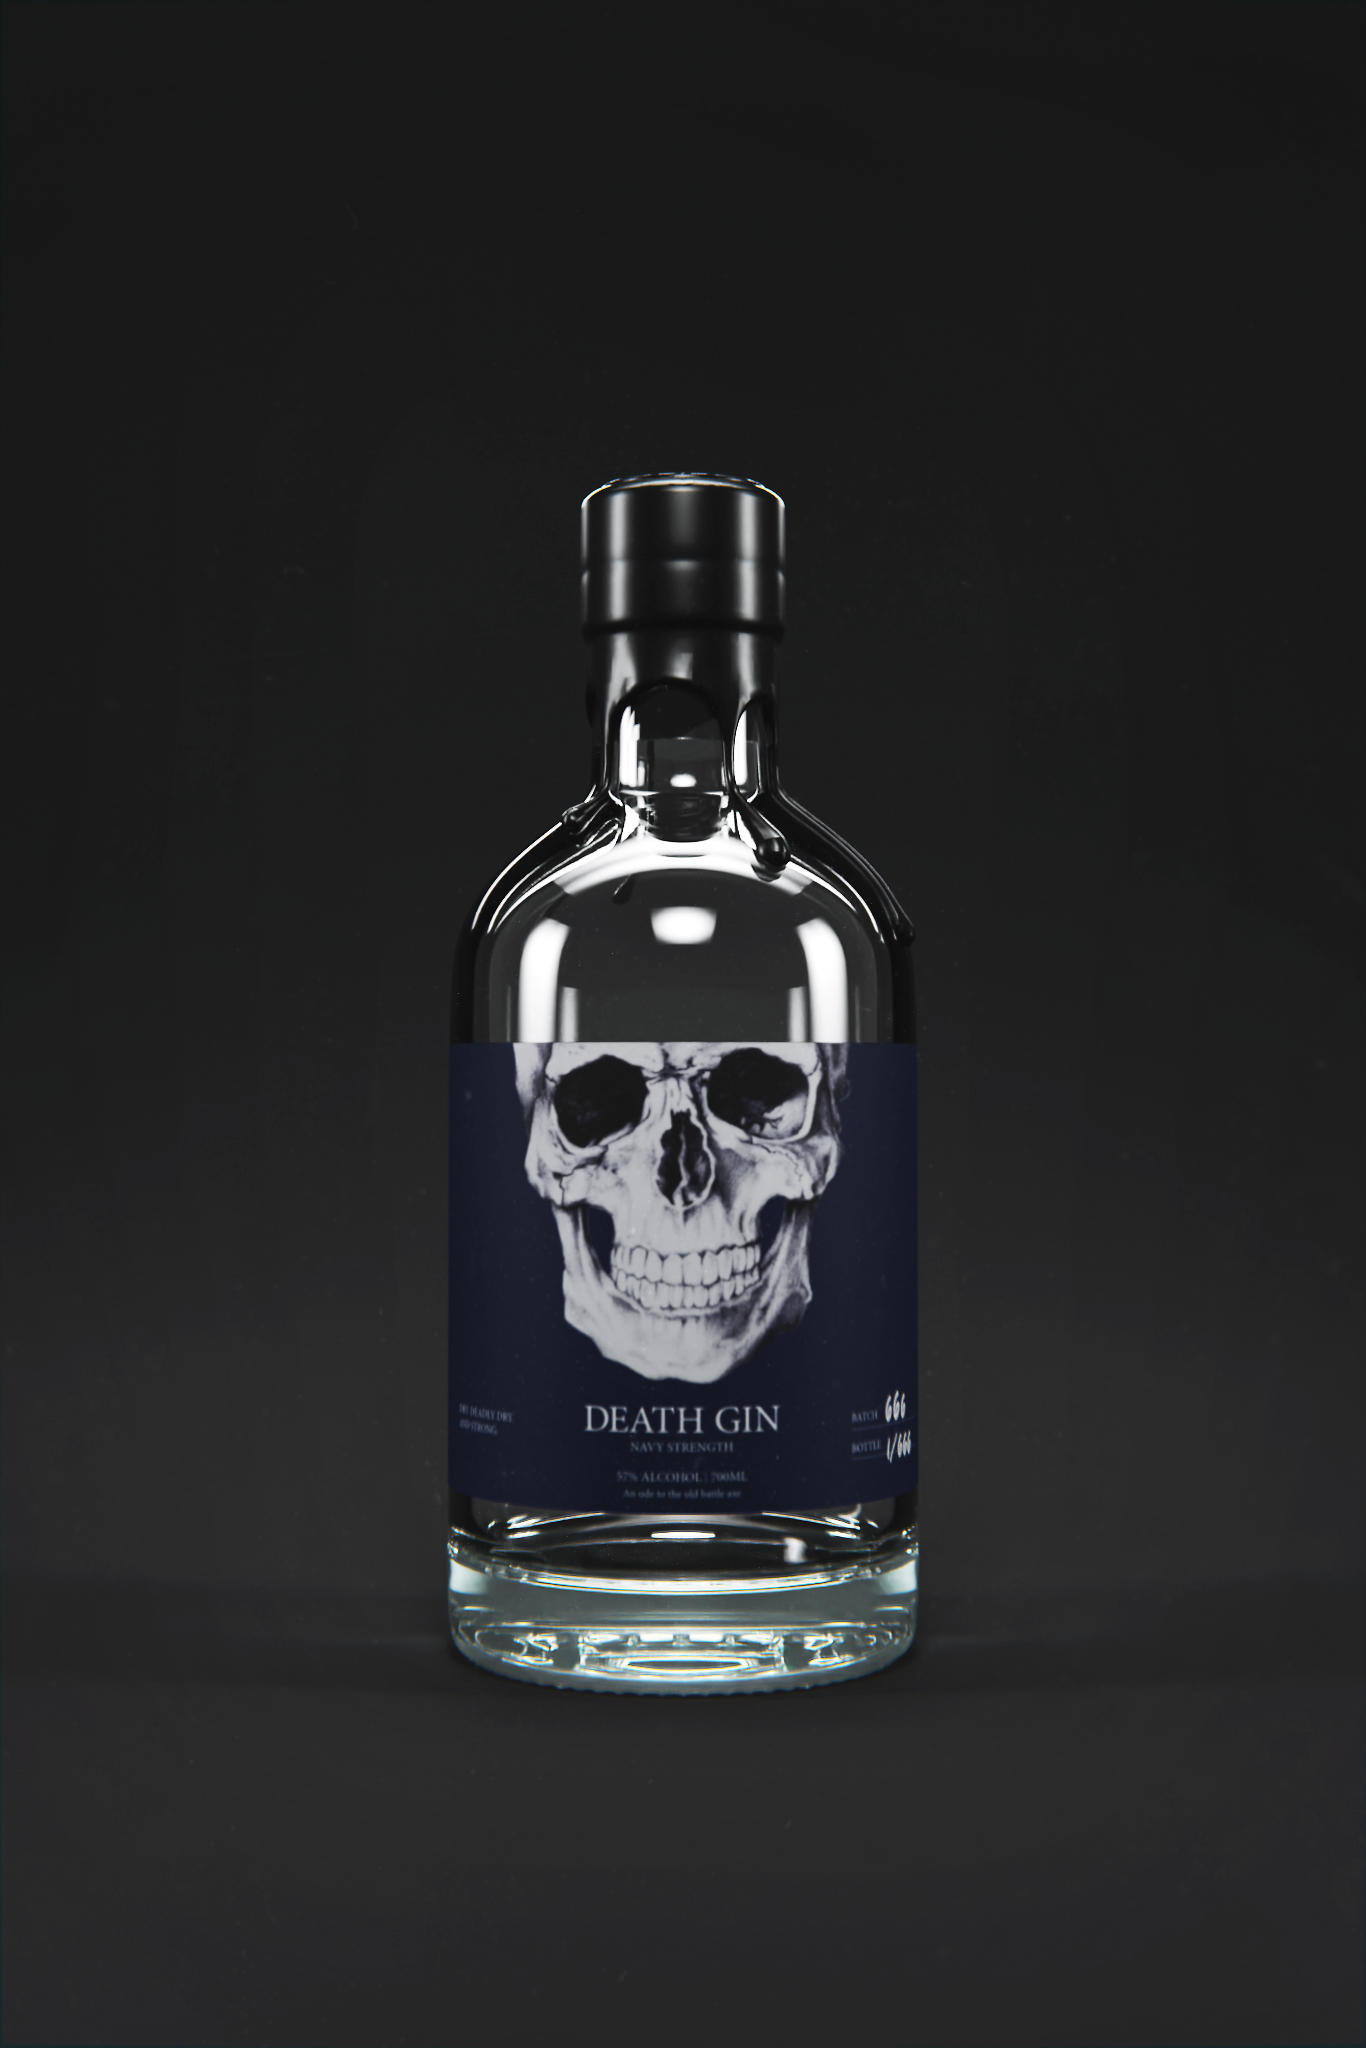 CGI Photography for Death Gin Product - by Sonny Nguyen